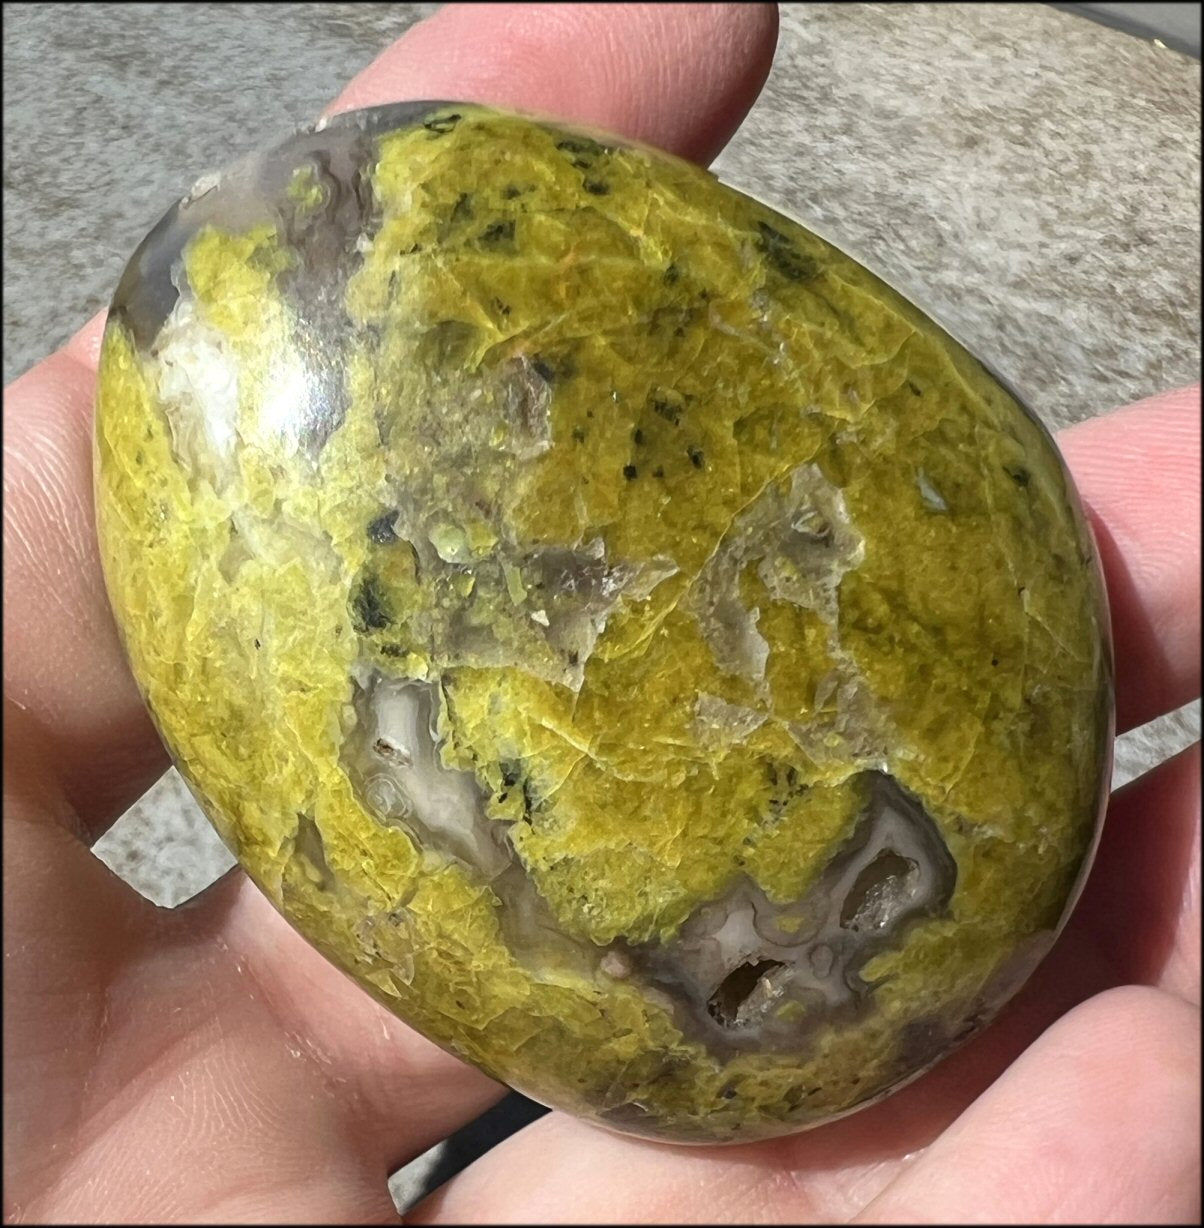 Madagascar Dark GREEN OPAL + CHALCEDONY Palm Stone with Awesome VUGS!